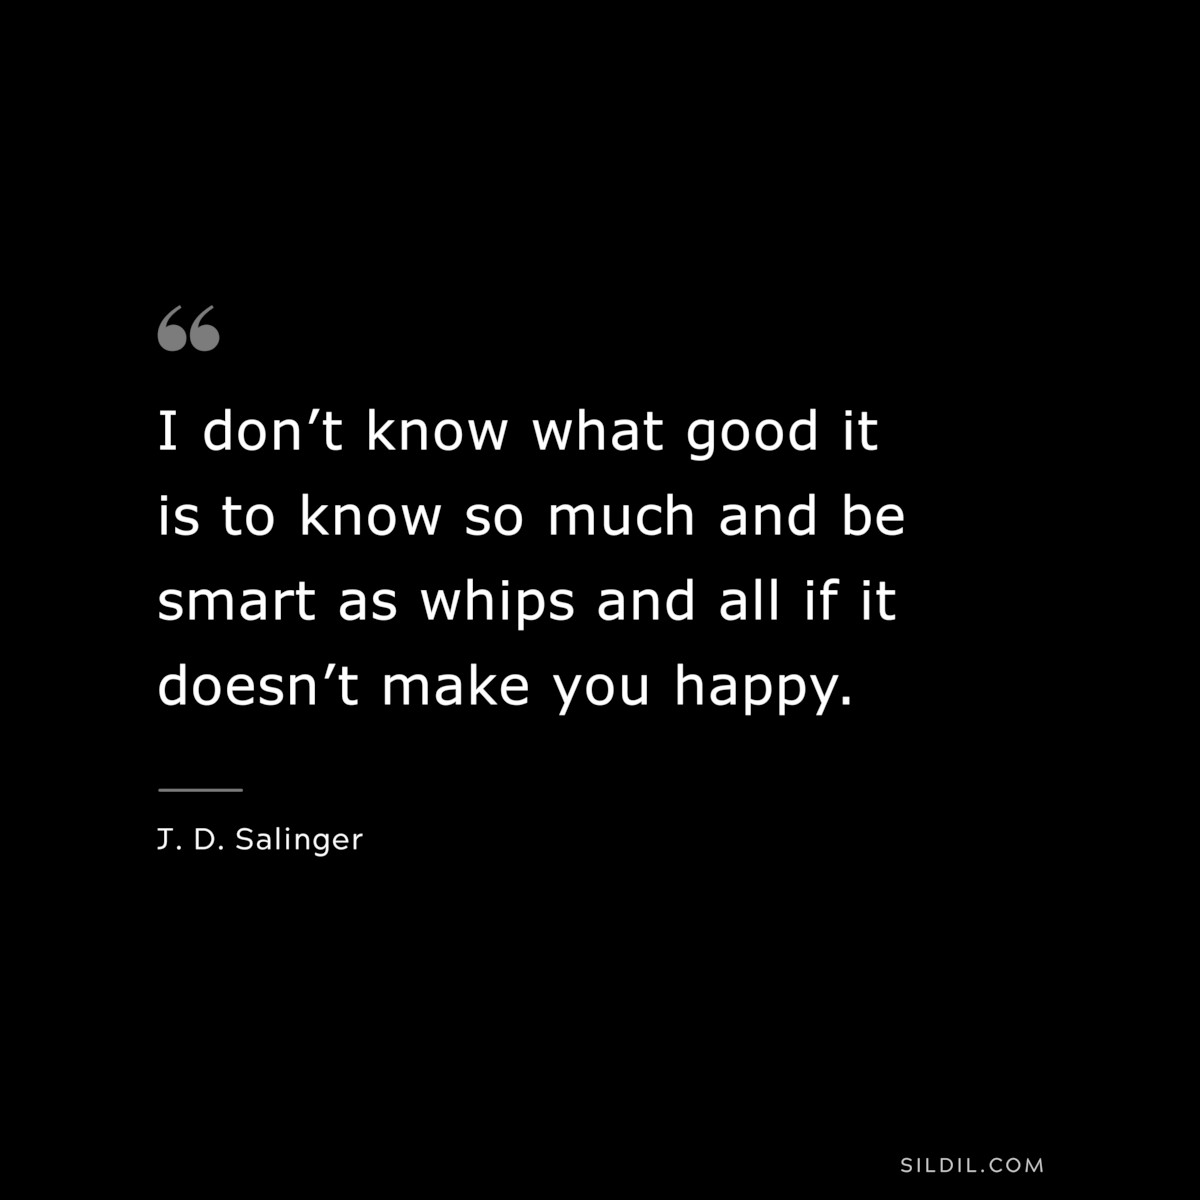 I don’t know what good it is to know so much and be smart as whips and all if it doesn’t make you happy. — J. D. Salinger